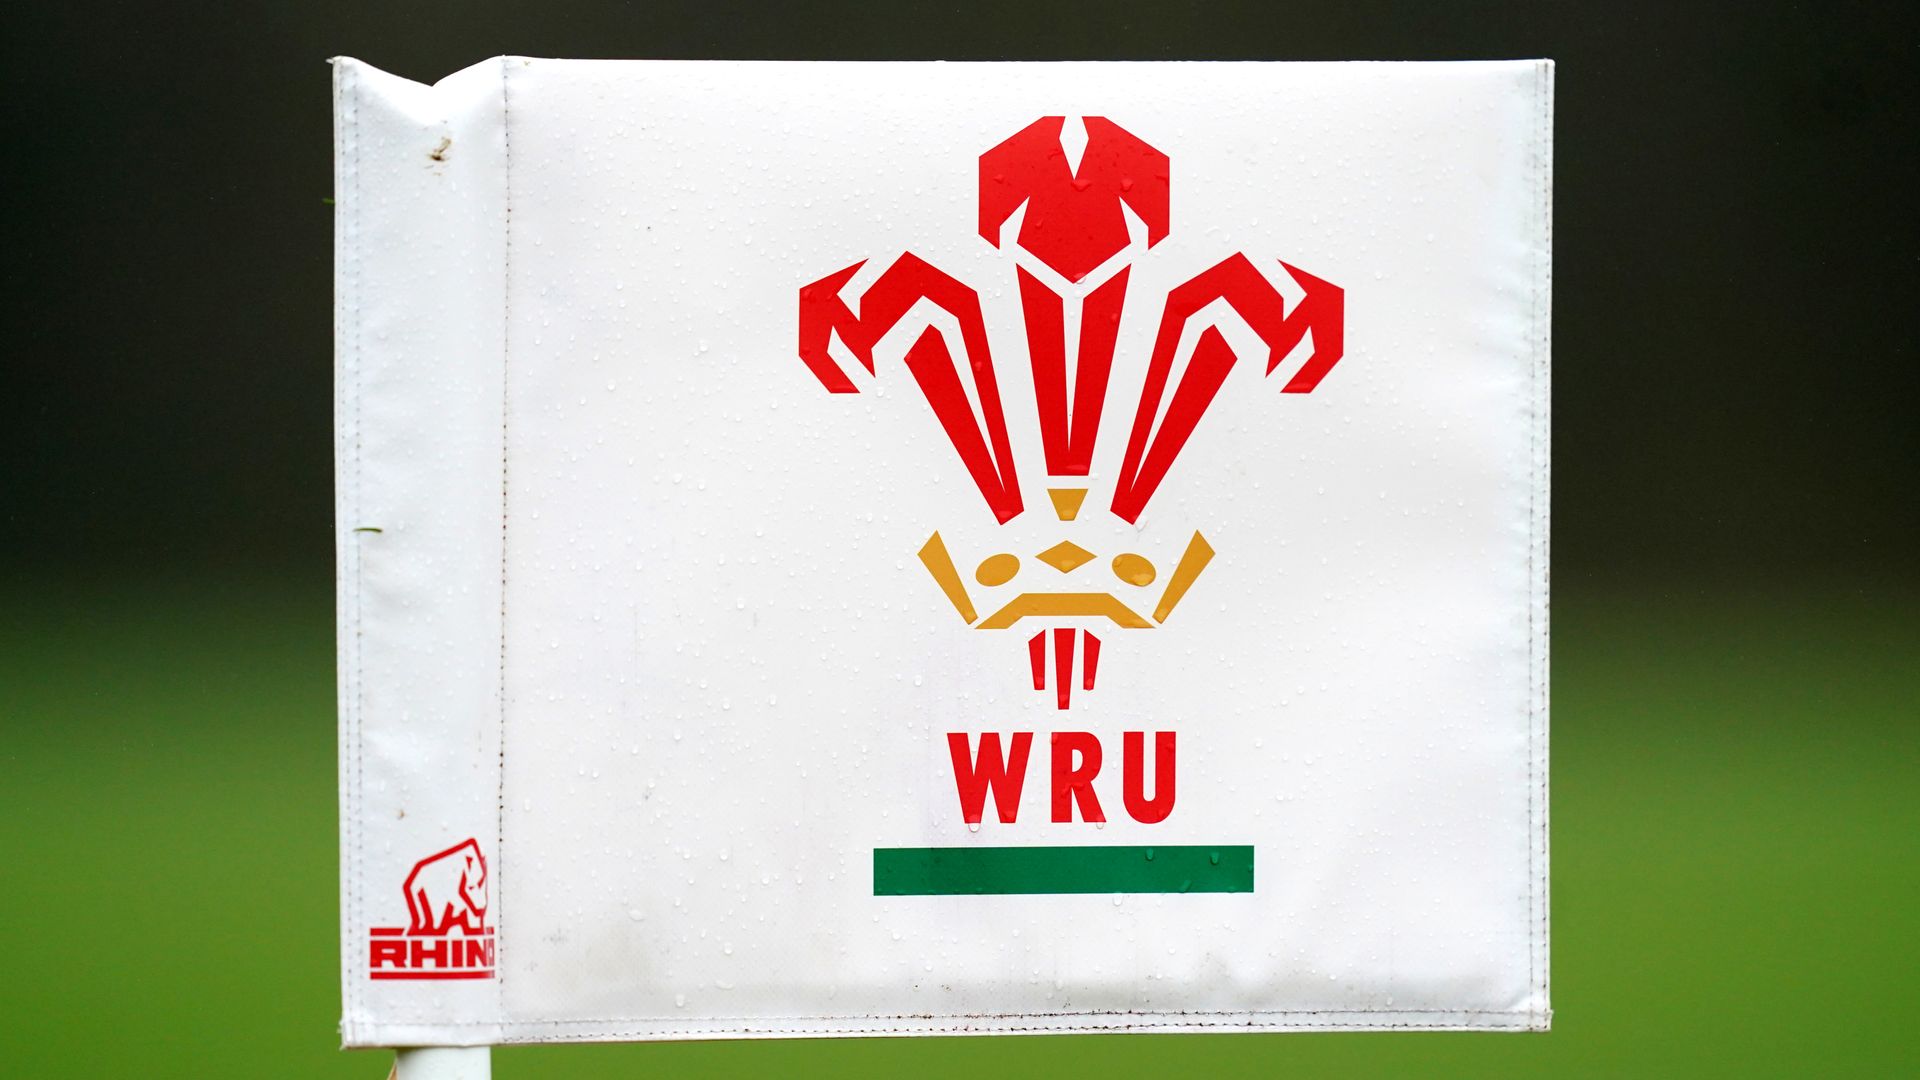 WRU urged to take 'strongest action' by WRPA after sexism allegations